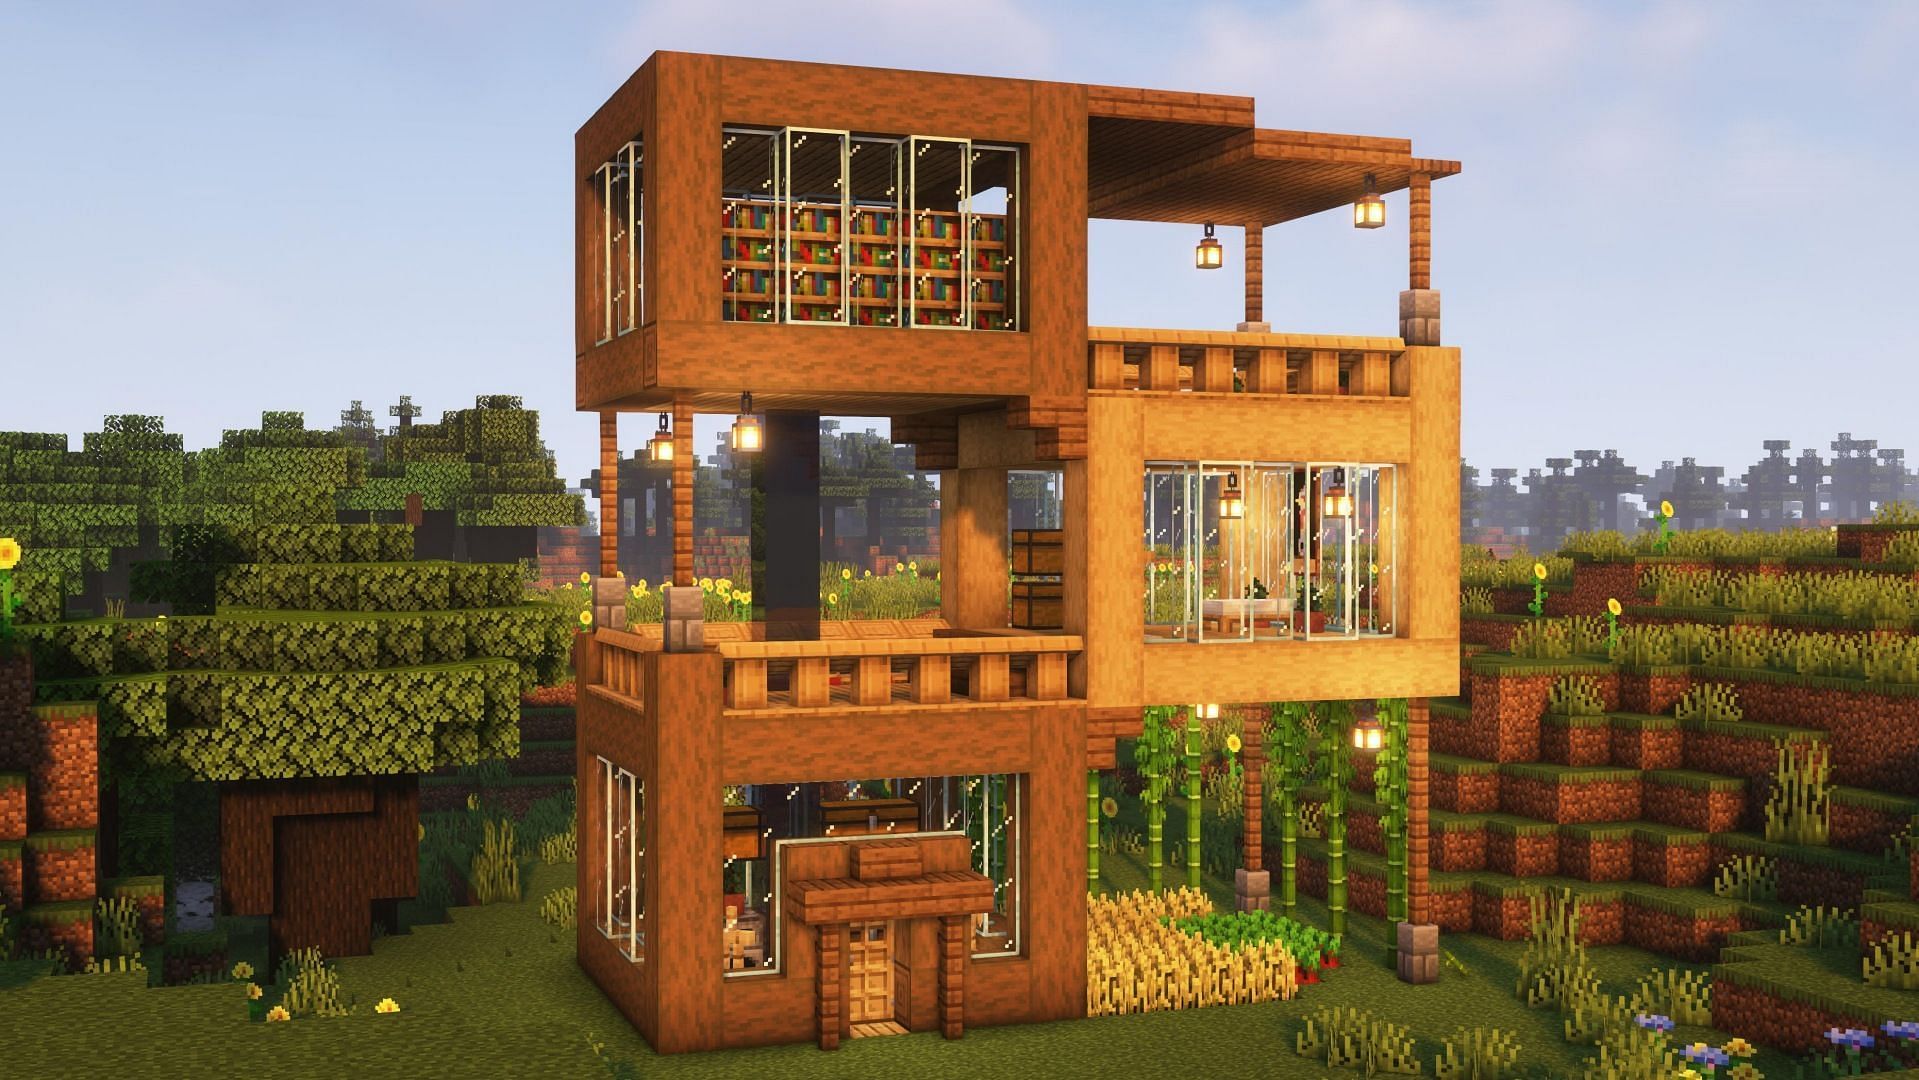 This unique house design has floors with different rooms and balconies in Minecraft (Image via Reddit/lexbuilds)